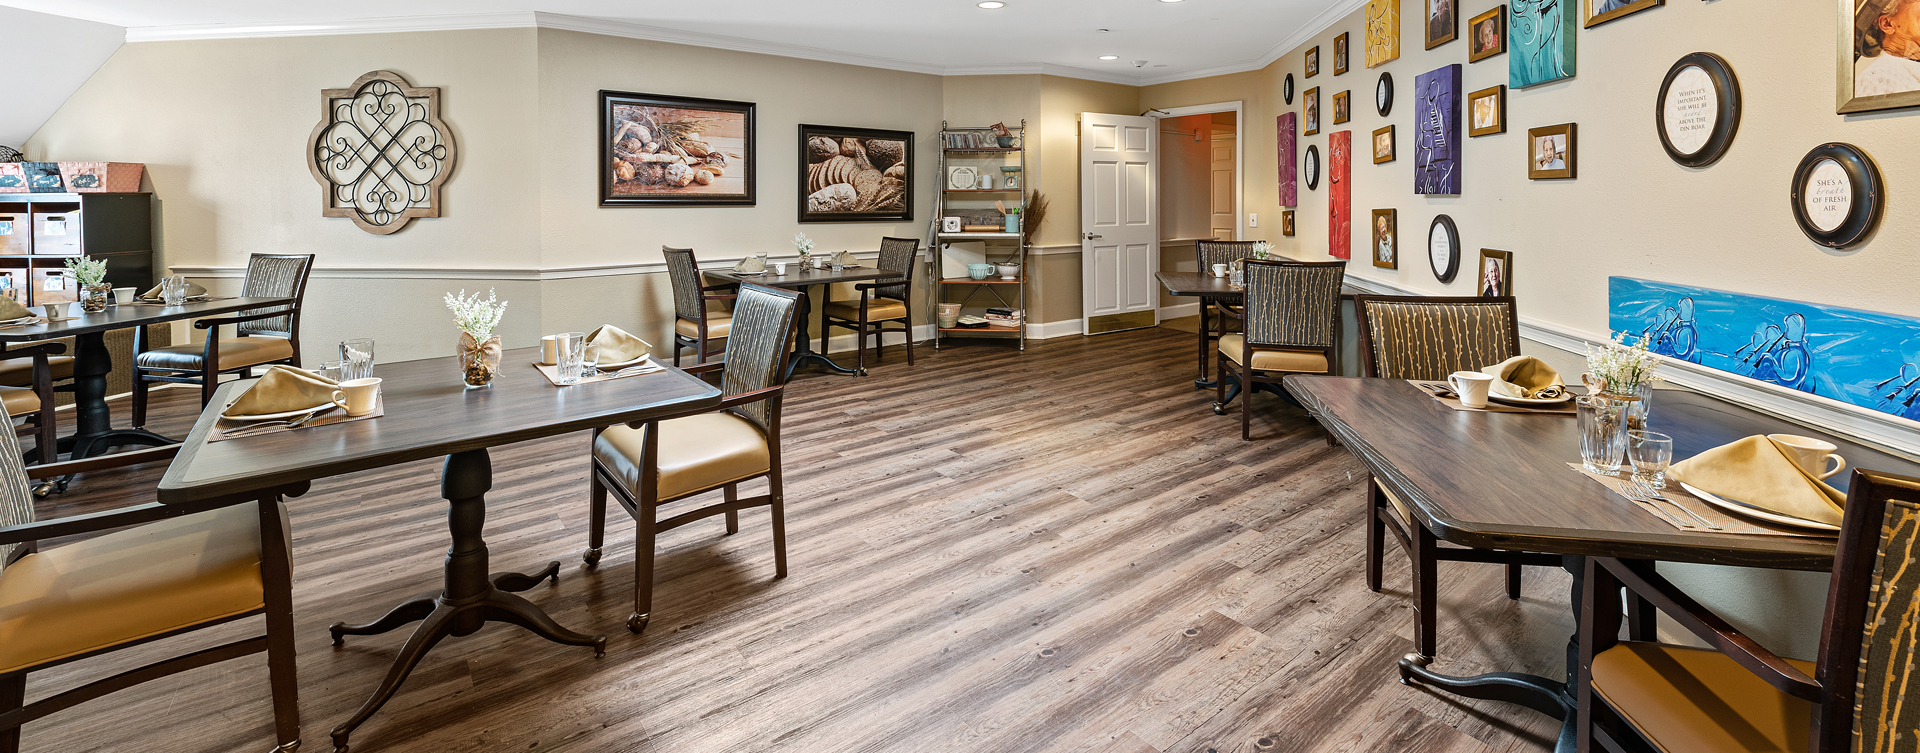 Mary B’s country kitchen evokes a sense of home and reconnects residents to past life skills at Bickford of Bexley